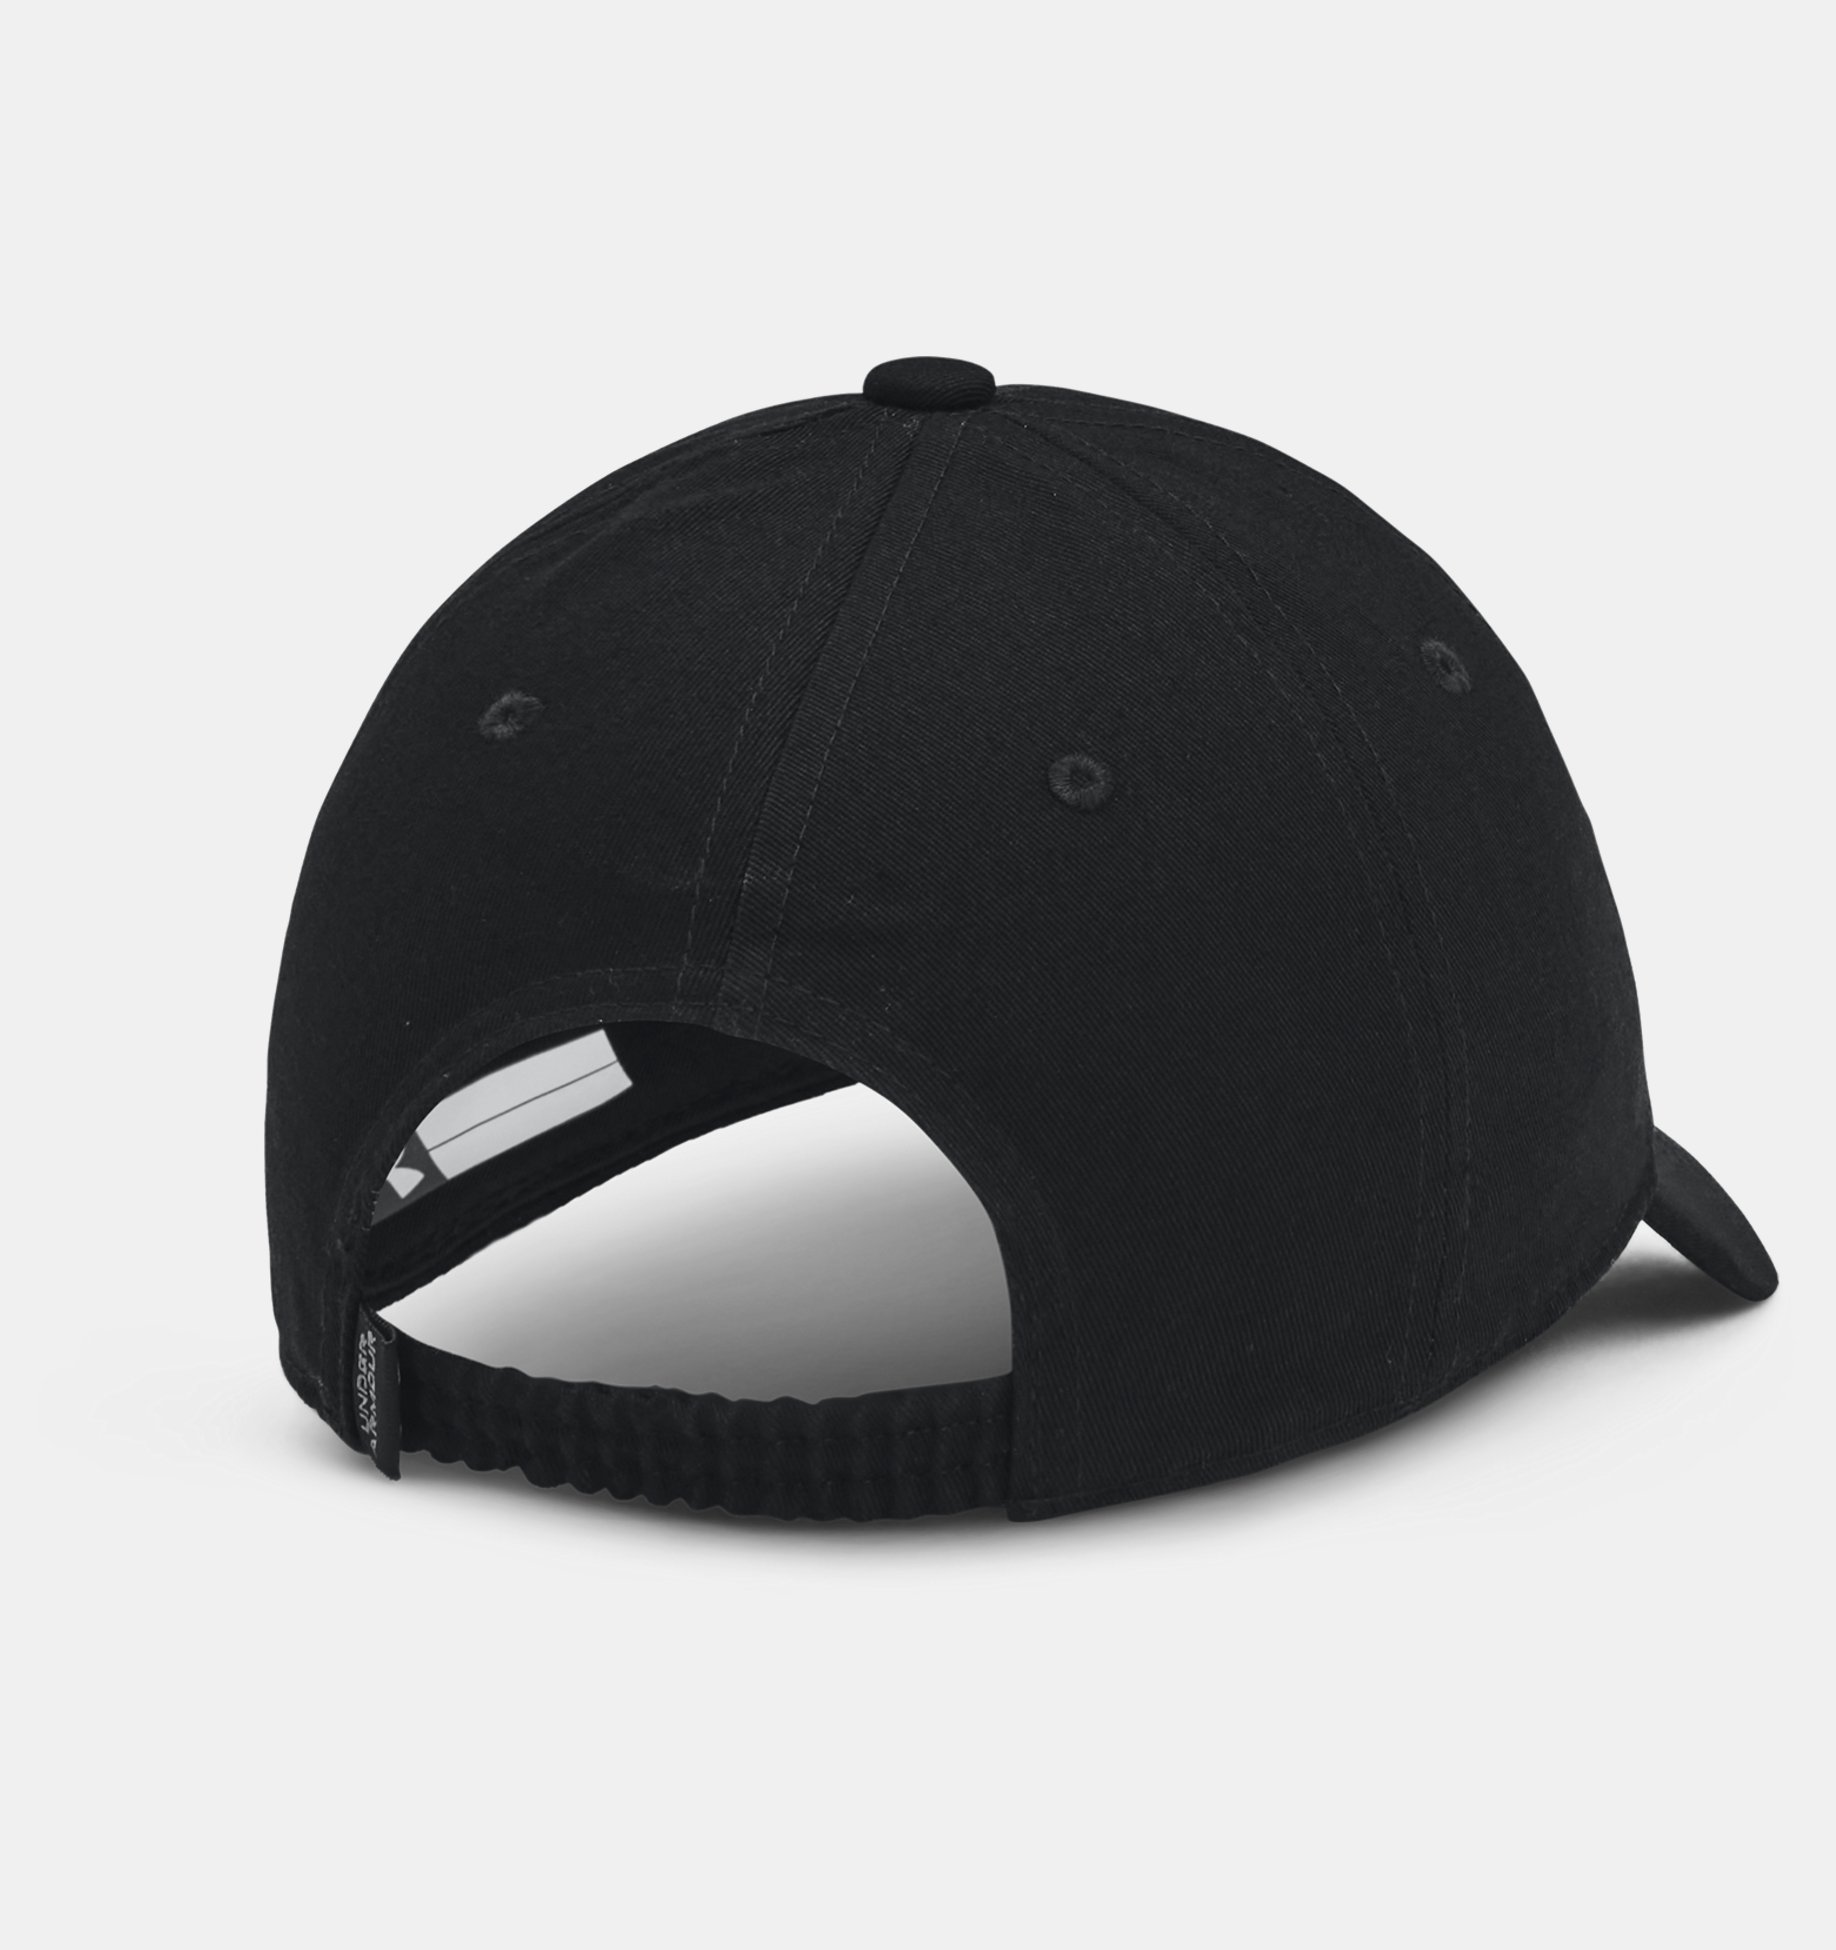 Impermeable Perder la paciencia siguiente Youth Project Rock Hat | Under Armour